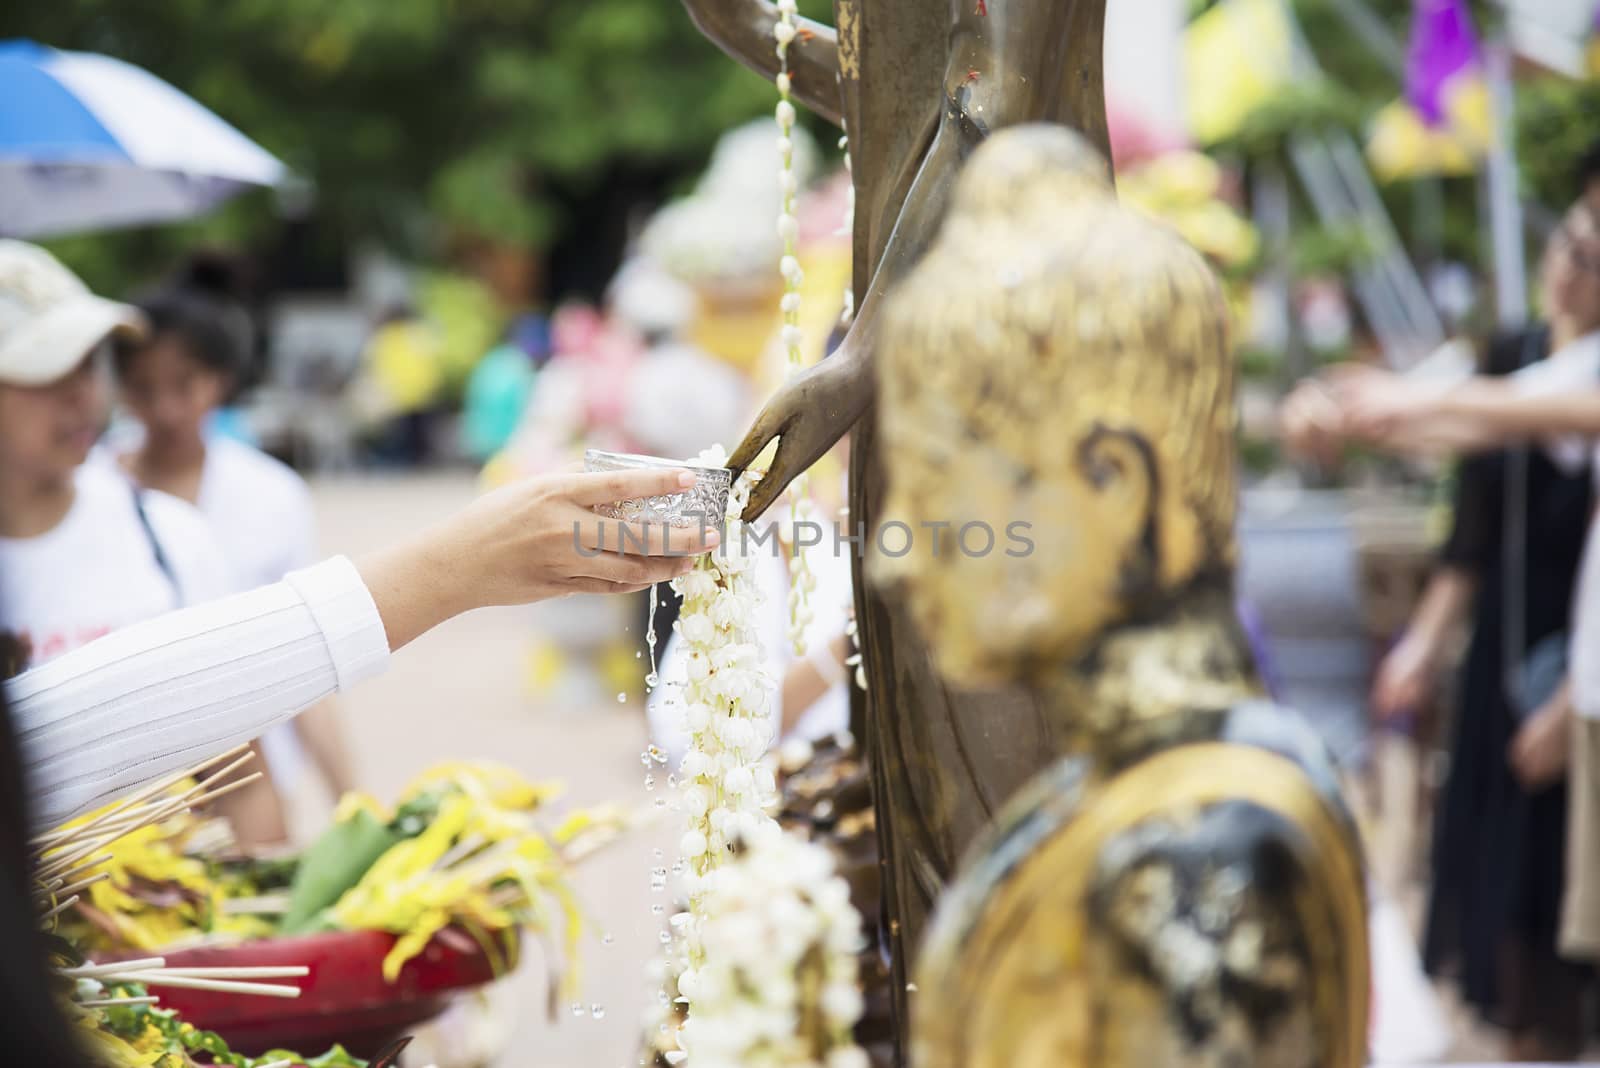 People pouring water onto a Buddha image this is a gesture of worship - people participate the local annual Chiang Mai traditional Bhudist festival. by pairhandmade